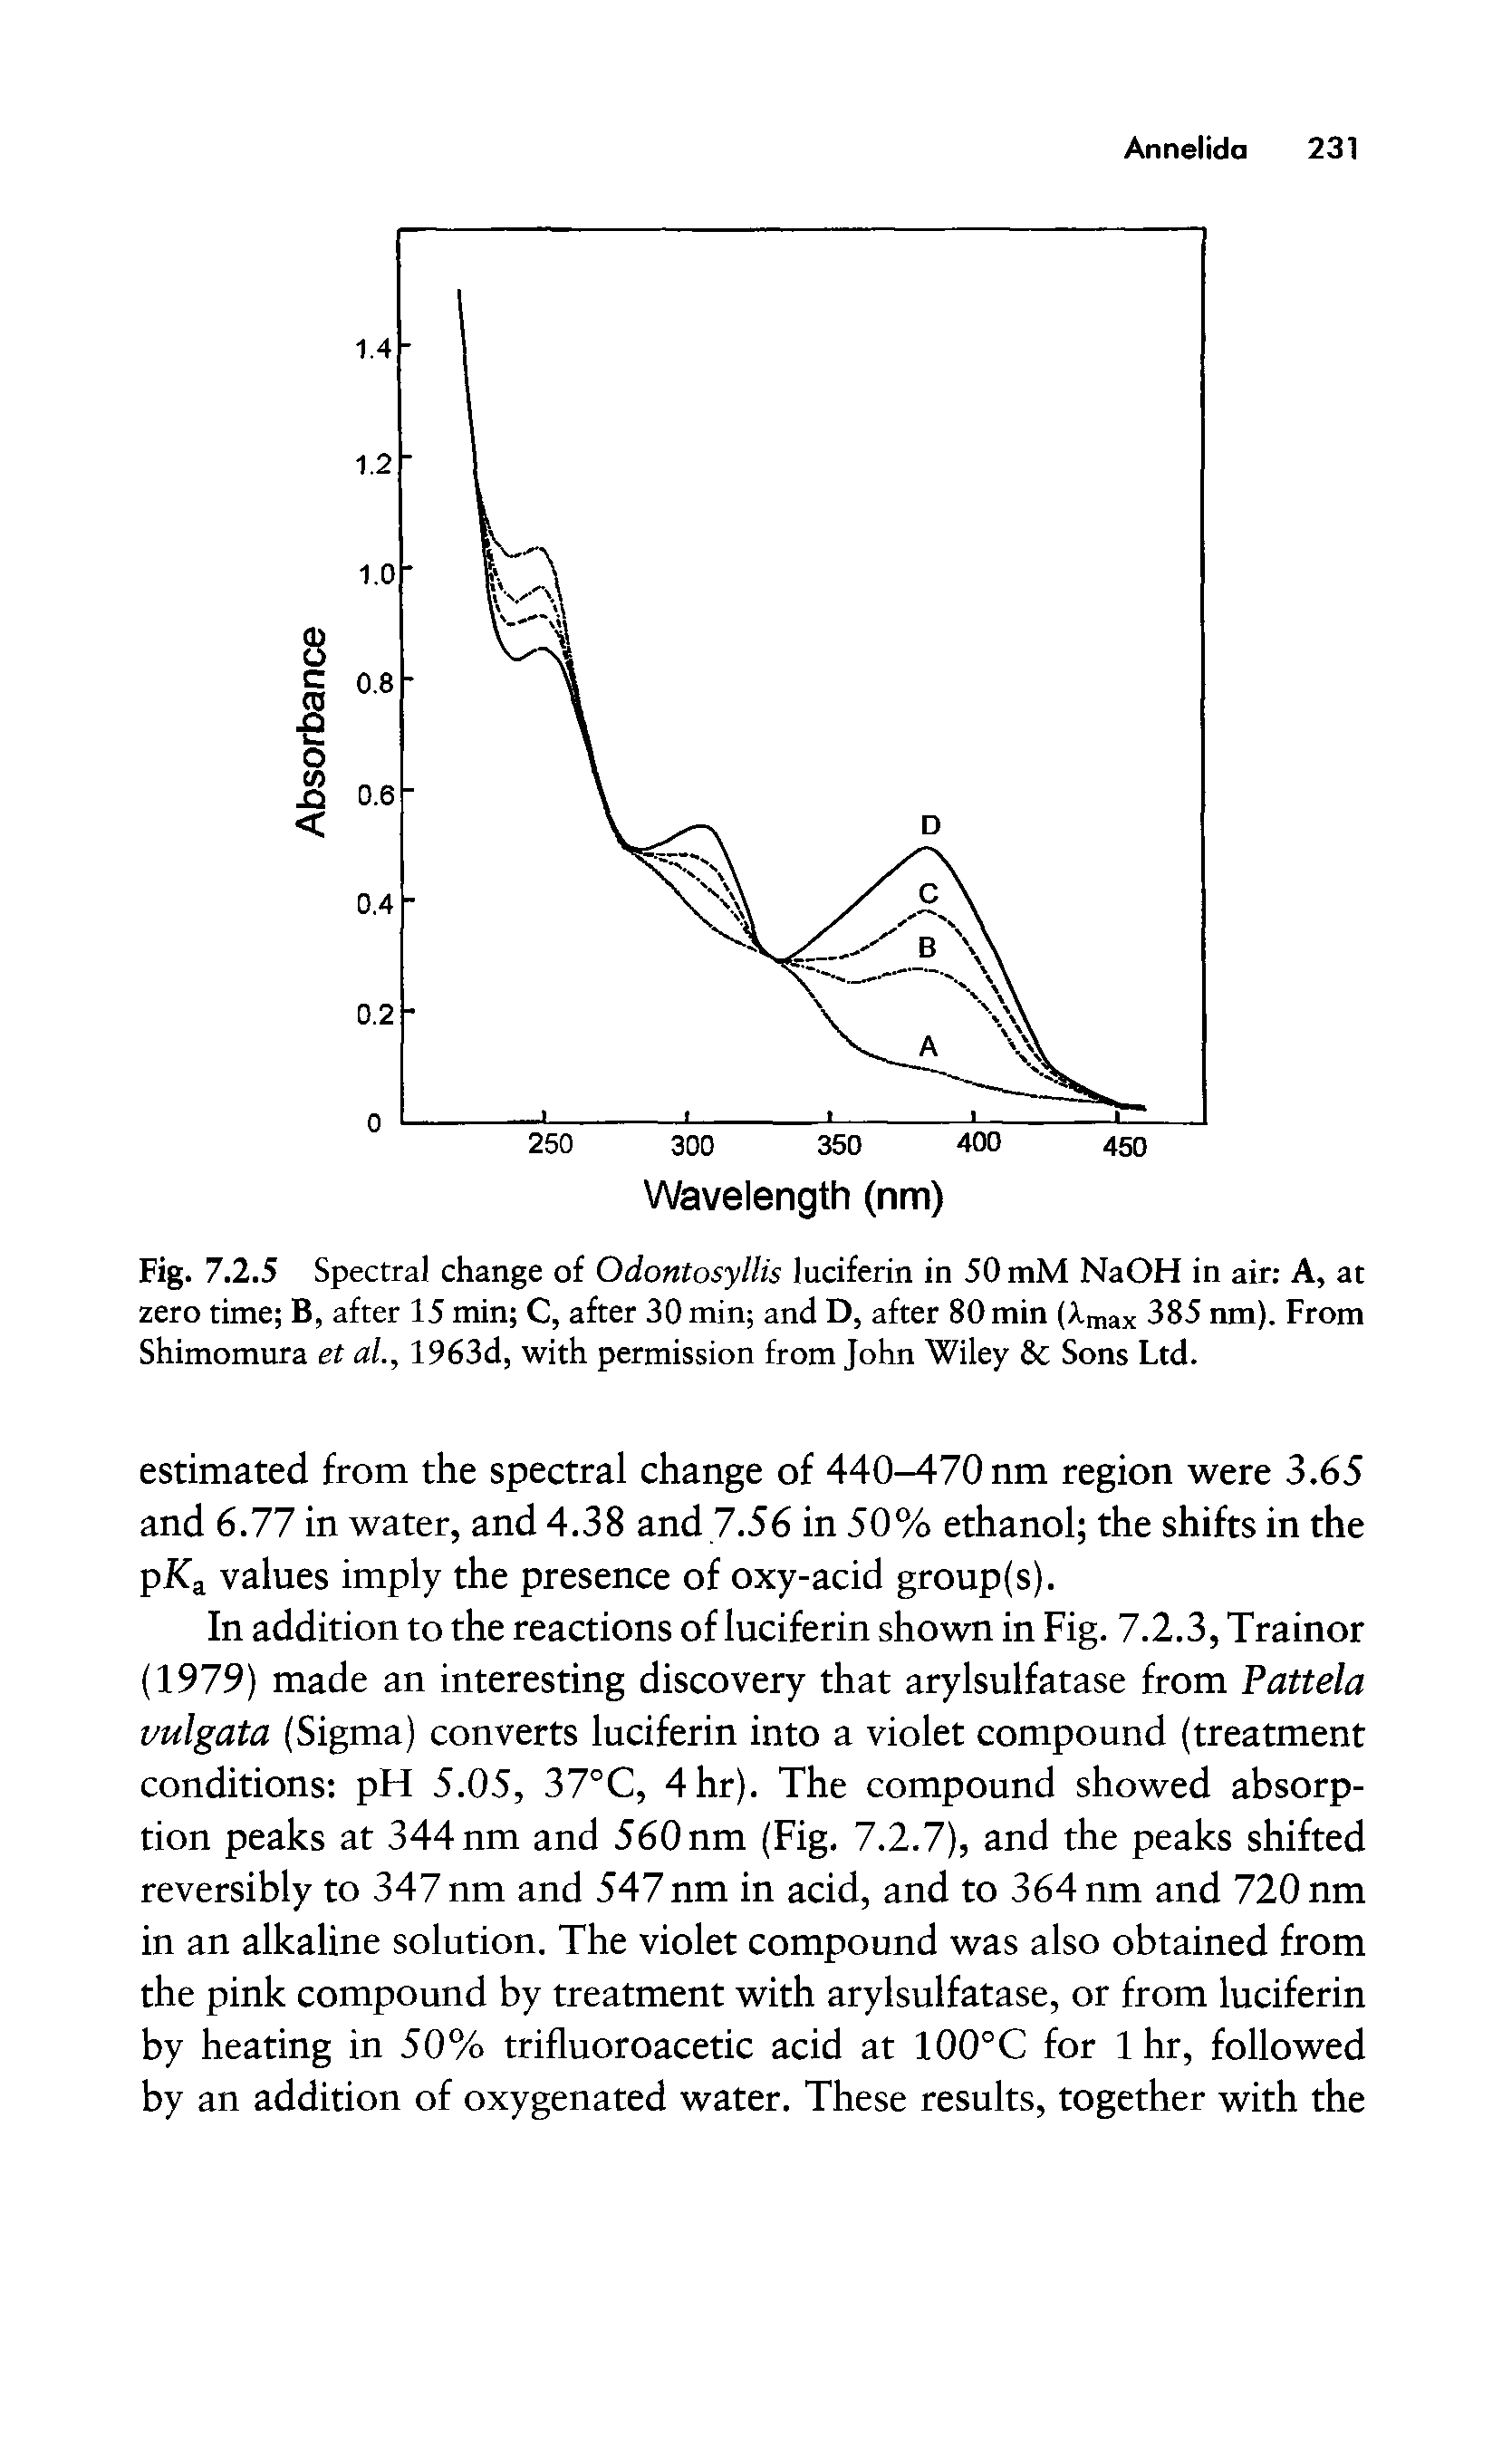 Fig. 7.2.5 Spectral change of Odontosyllis luciferin in 50 mM NaOH in air A, at zero time B, after 15 min C, after 30 min and D, after 80 min (Xmax 385 nm). From Shimomura et ai, 1963d, with permission from John Wiley Sons Ltd.